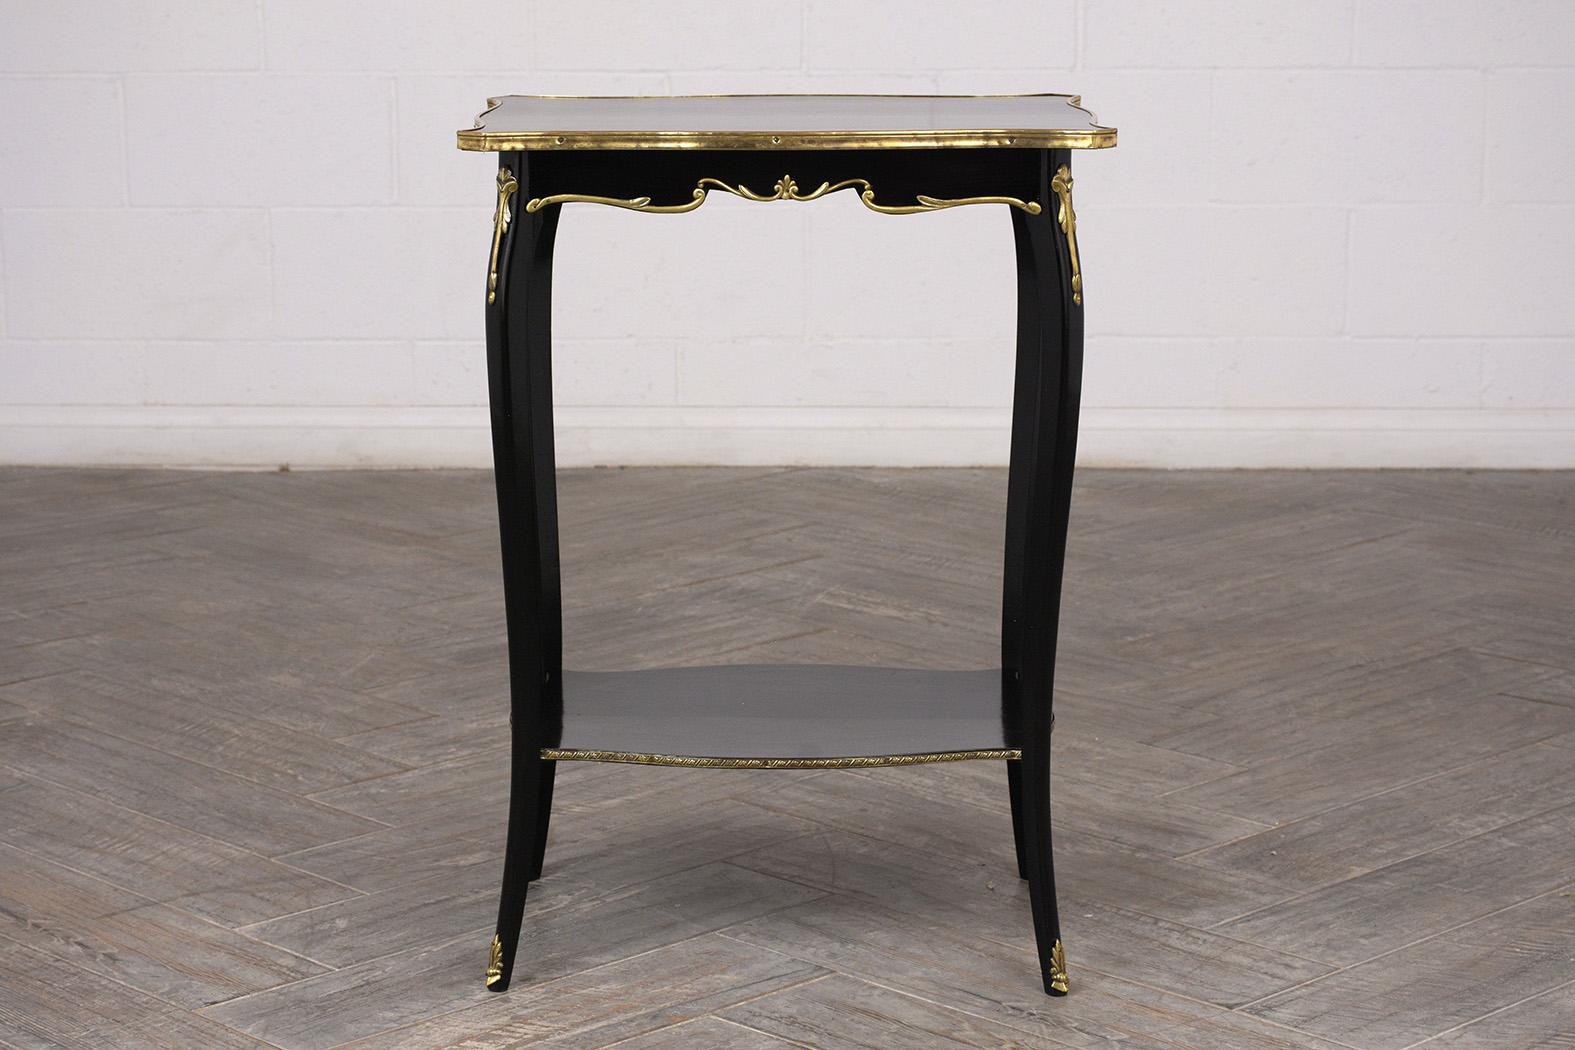 Lovely pair of side tables. Made from solid mahogany wood, with new rich ebonized finish. Solid wood top with a brass trim, and lovely brass decorations on the sides, and corners. Features a bottom open shelve with brass design trims. Finished with